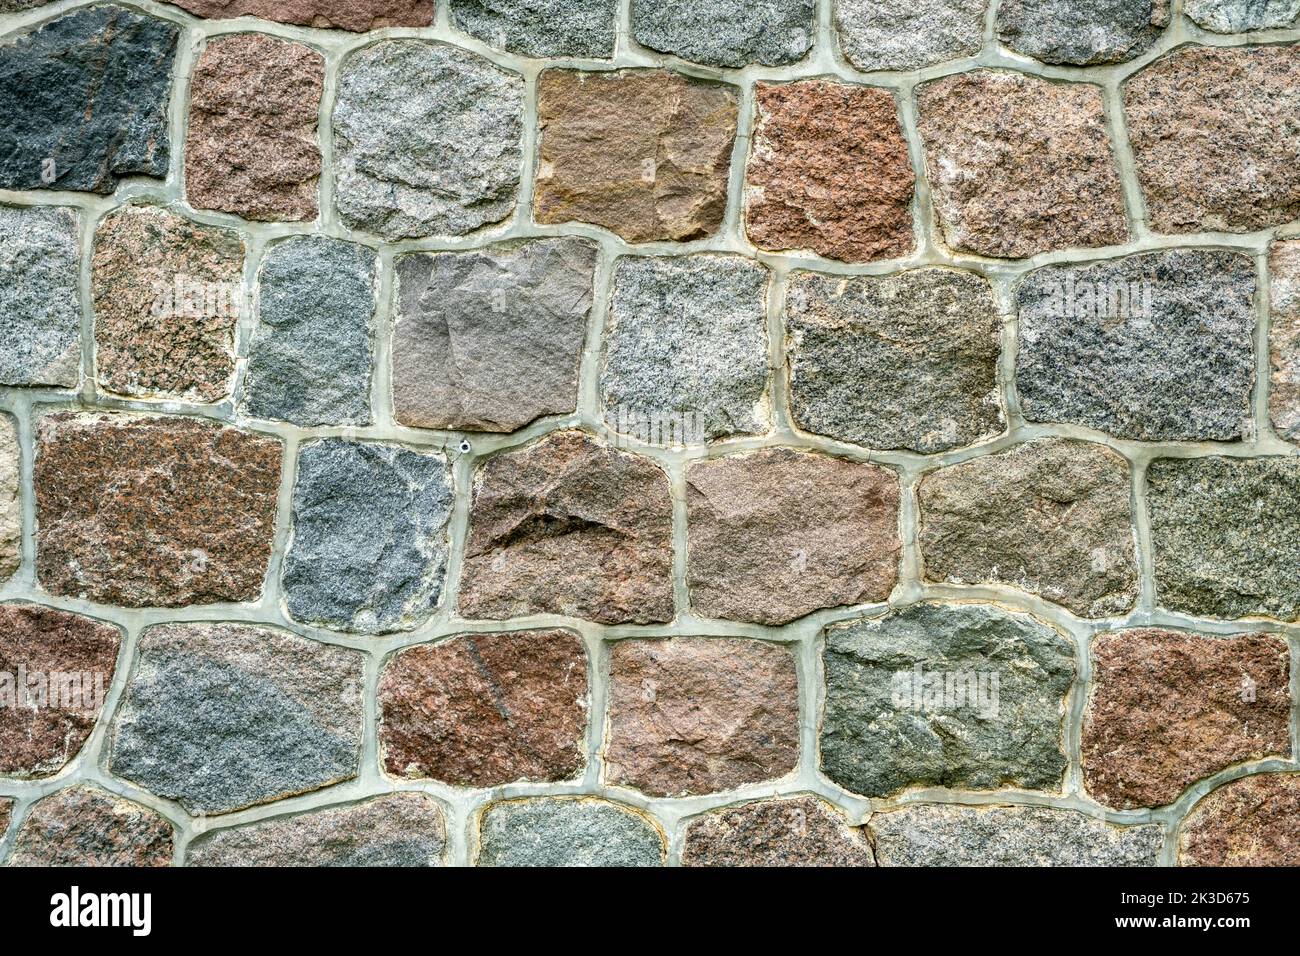 https://c8.alamy.com/comp/2K3D675/close-up-stone-and-mortar-wall-for-background-2K3D675.jpg